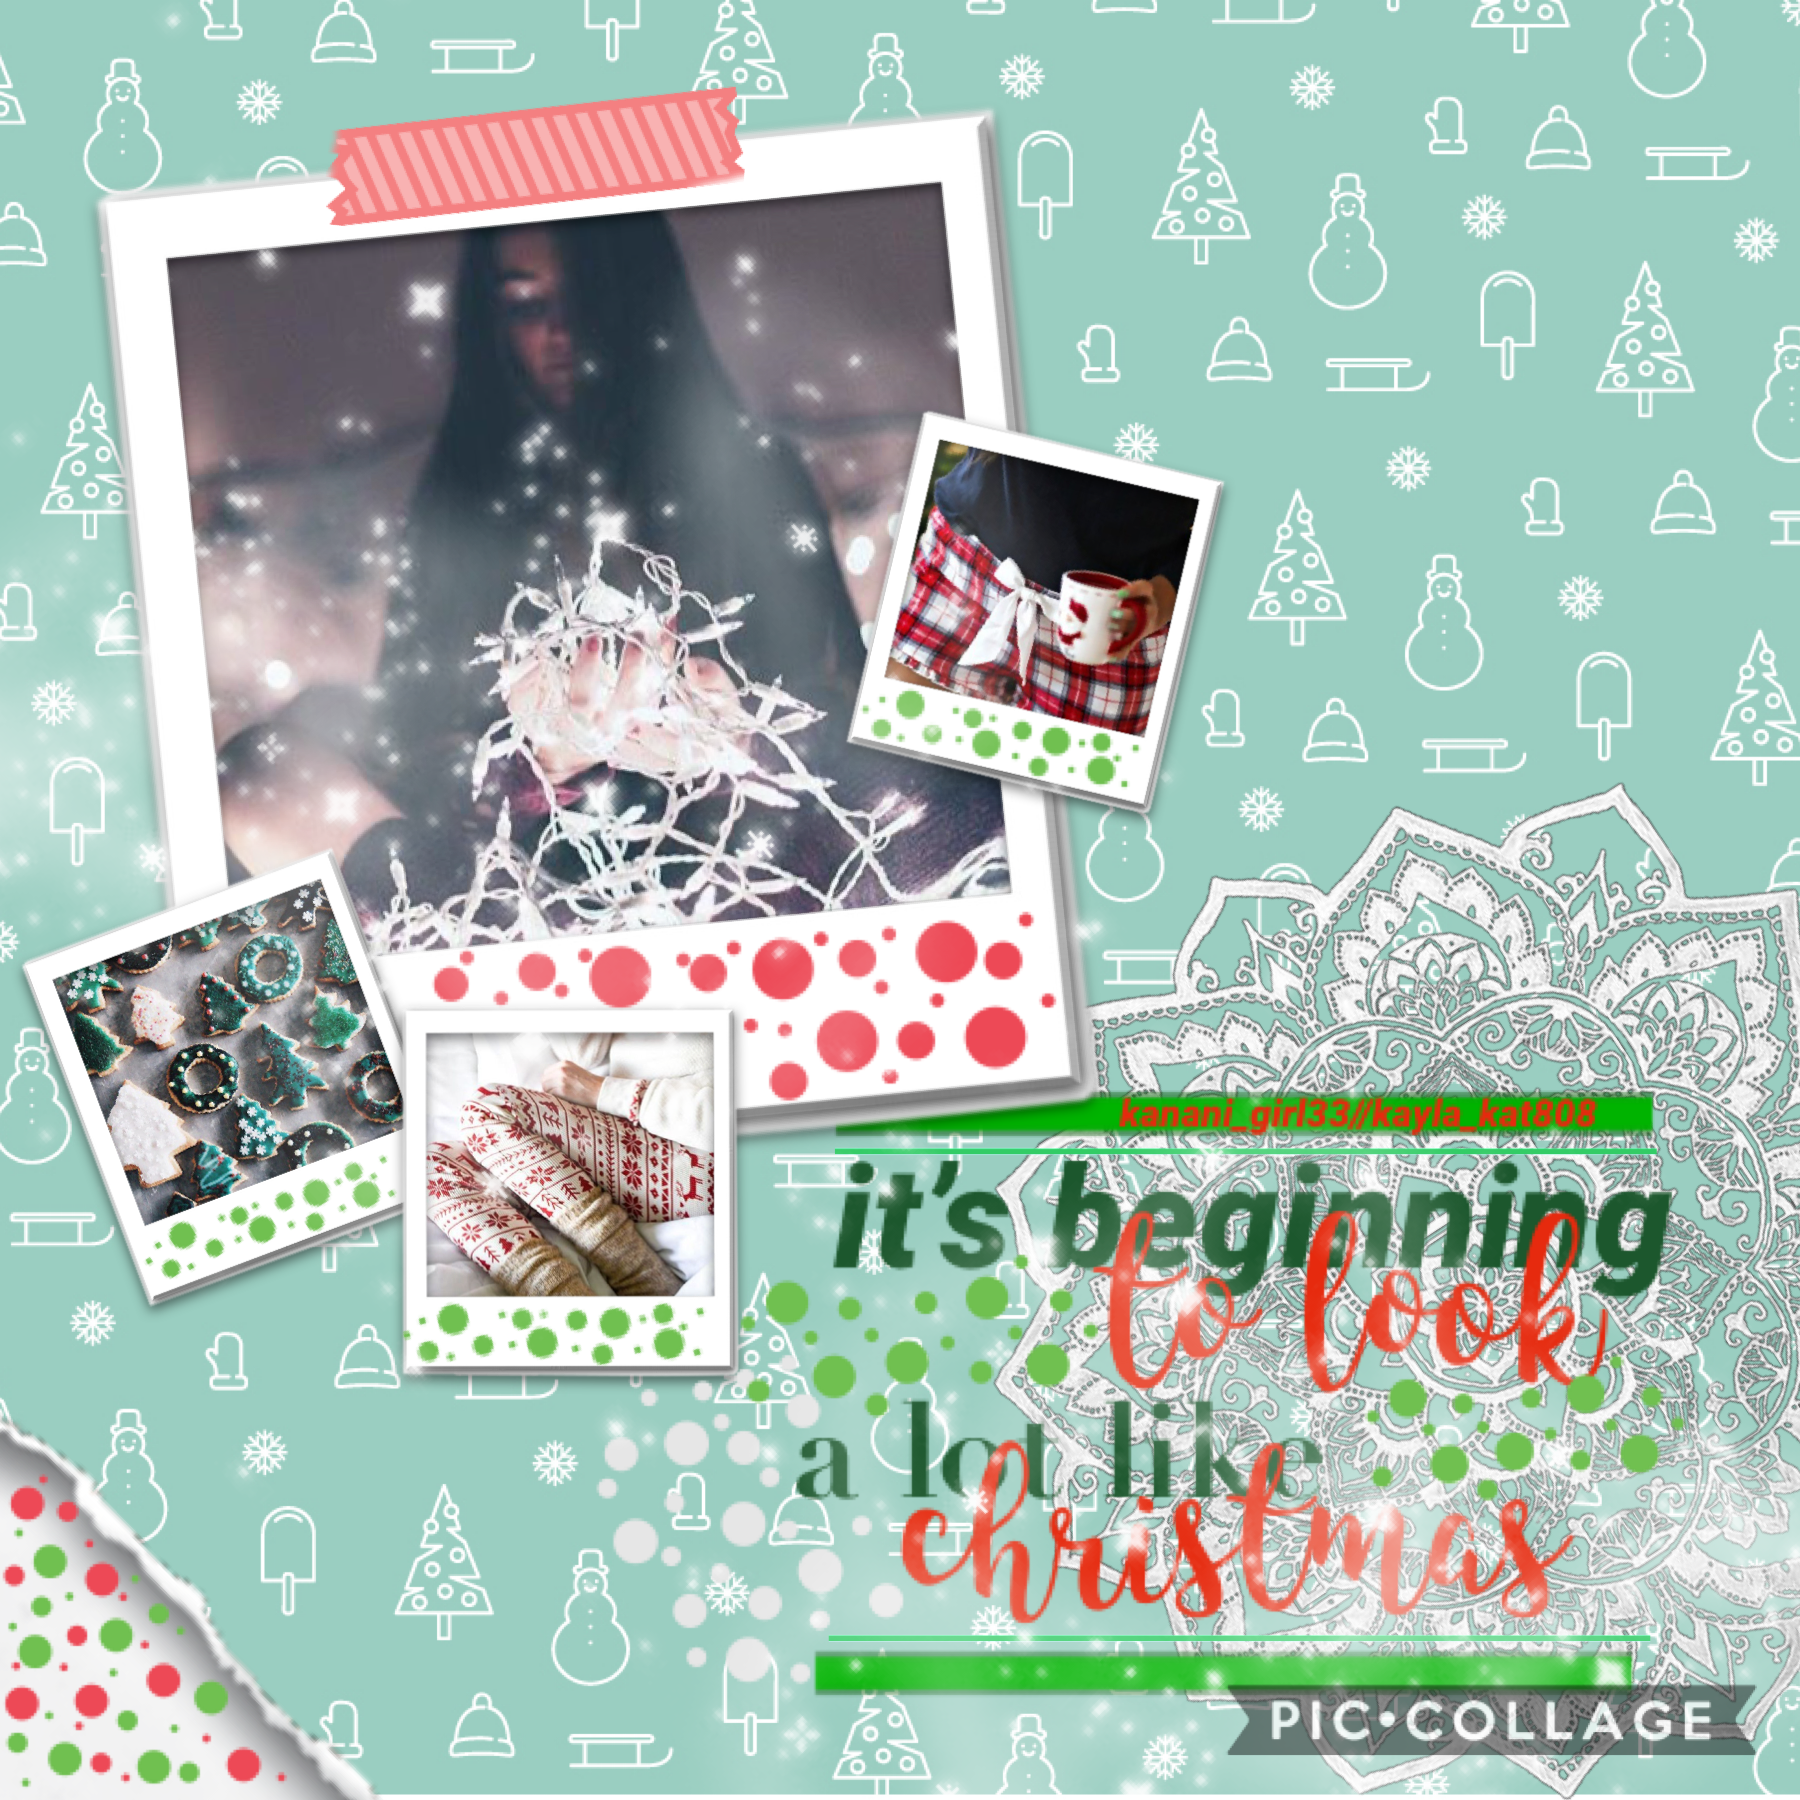 🌲tap🌲
december 5, 2020
i can’t believe it’s already december! christmas is almost here 🤍 anyways have you guys heard shawn mendes new album ♥️ i love it especially piece of you and can’t take my eyes off you!! also my q&a is on my extras blessed33- 💗 hope